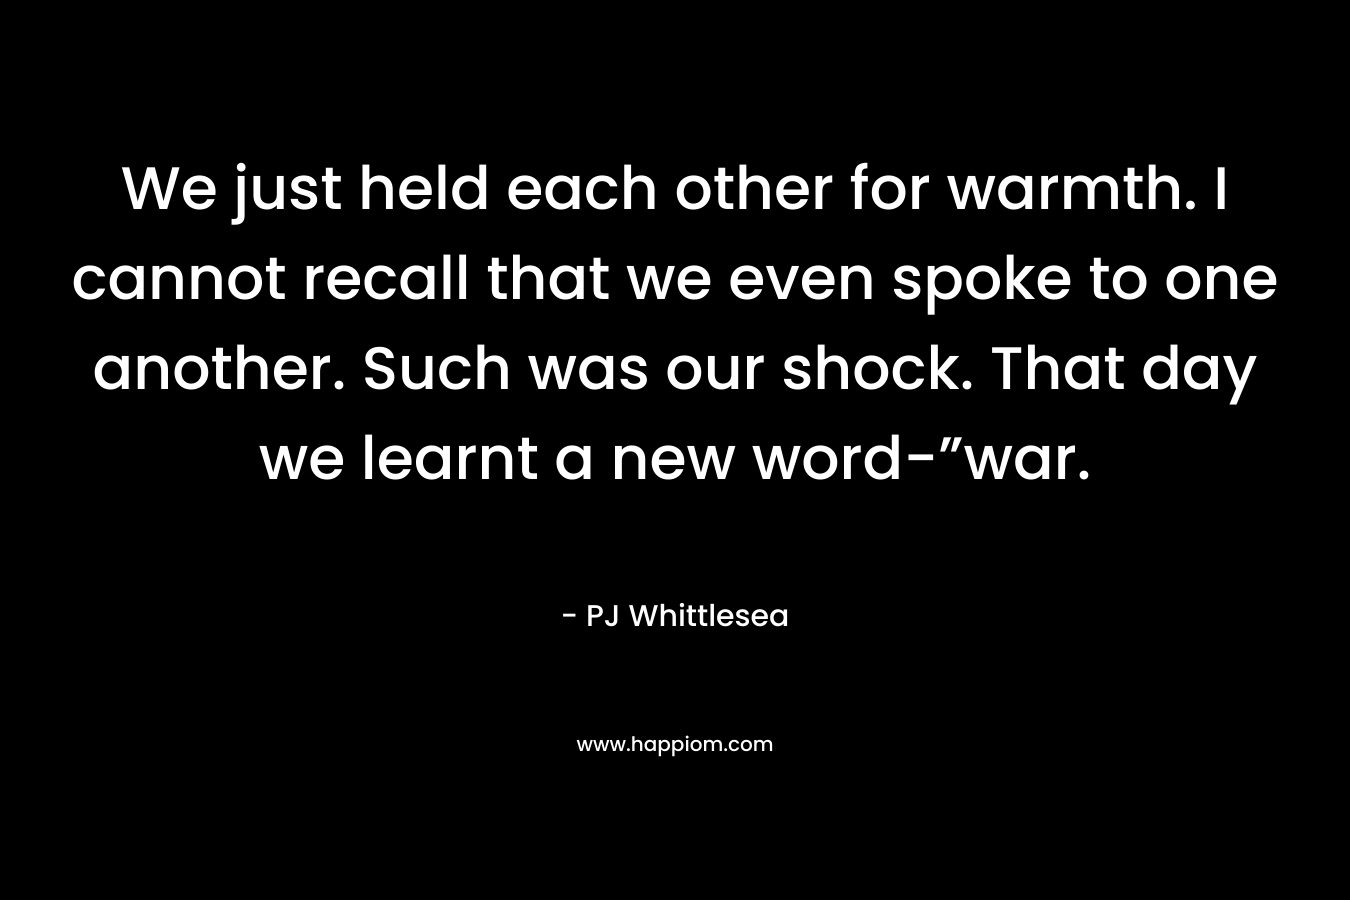 We just held each other for warmth. I cannot recall that we even spoke to one another. Such was our shock. That day we learnt a new word-”war.